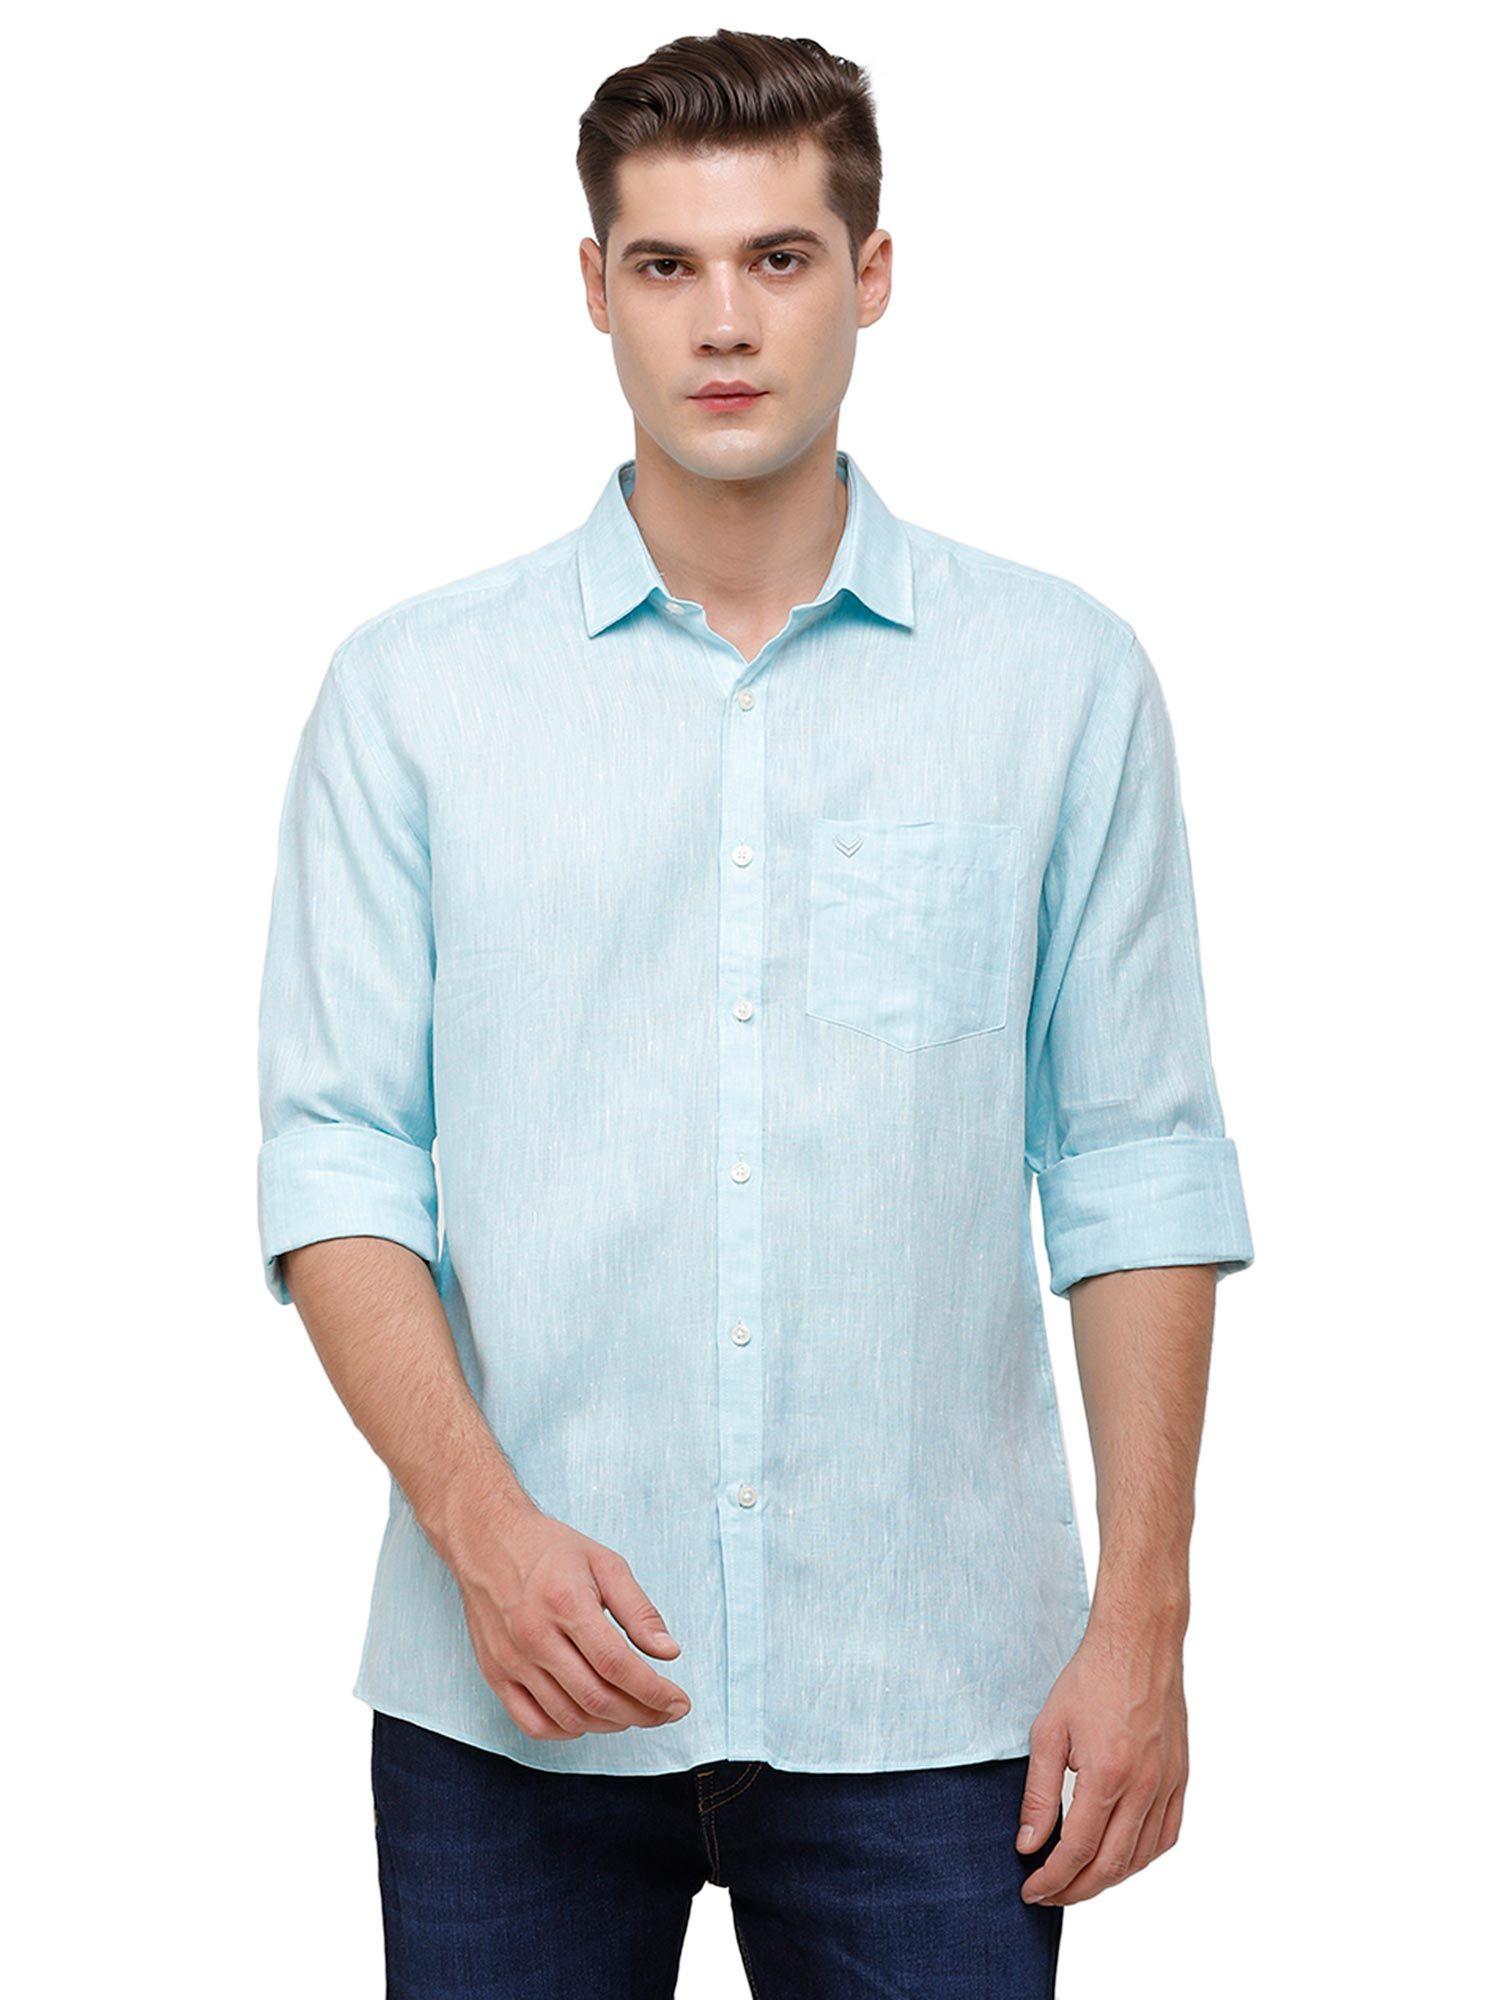 men's-pure-linen-turquoise-blue-chambray-regular-fit-full-sleeve-casual-shirt